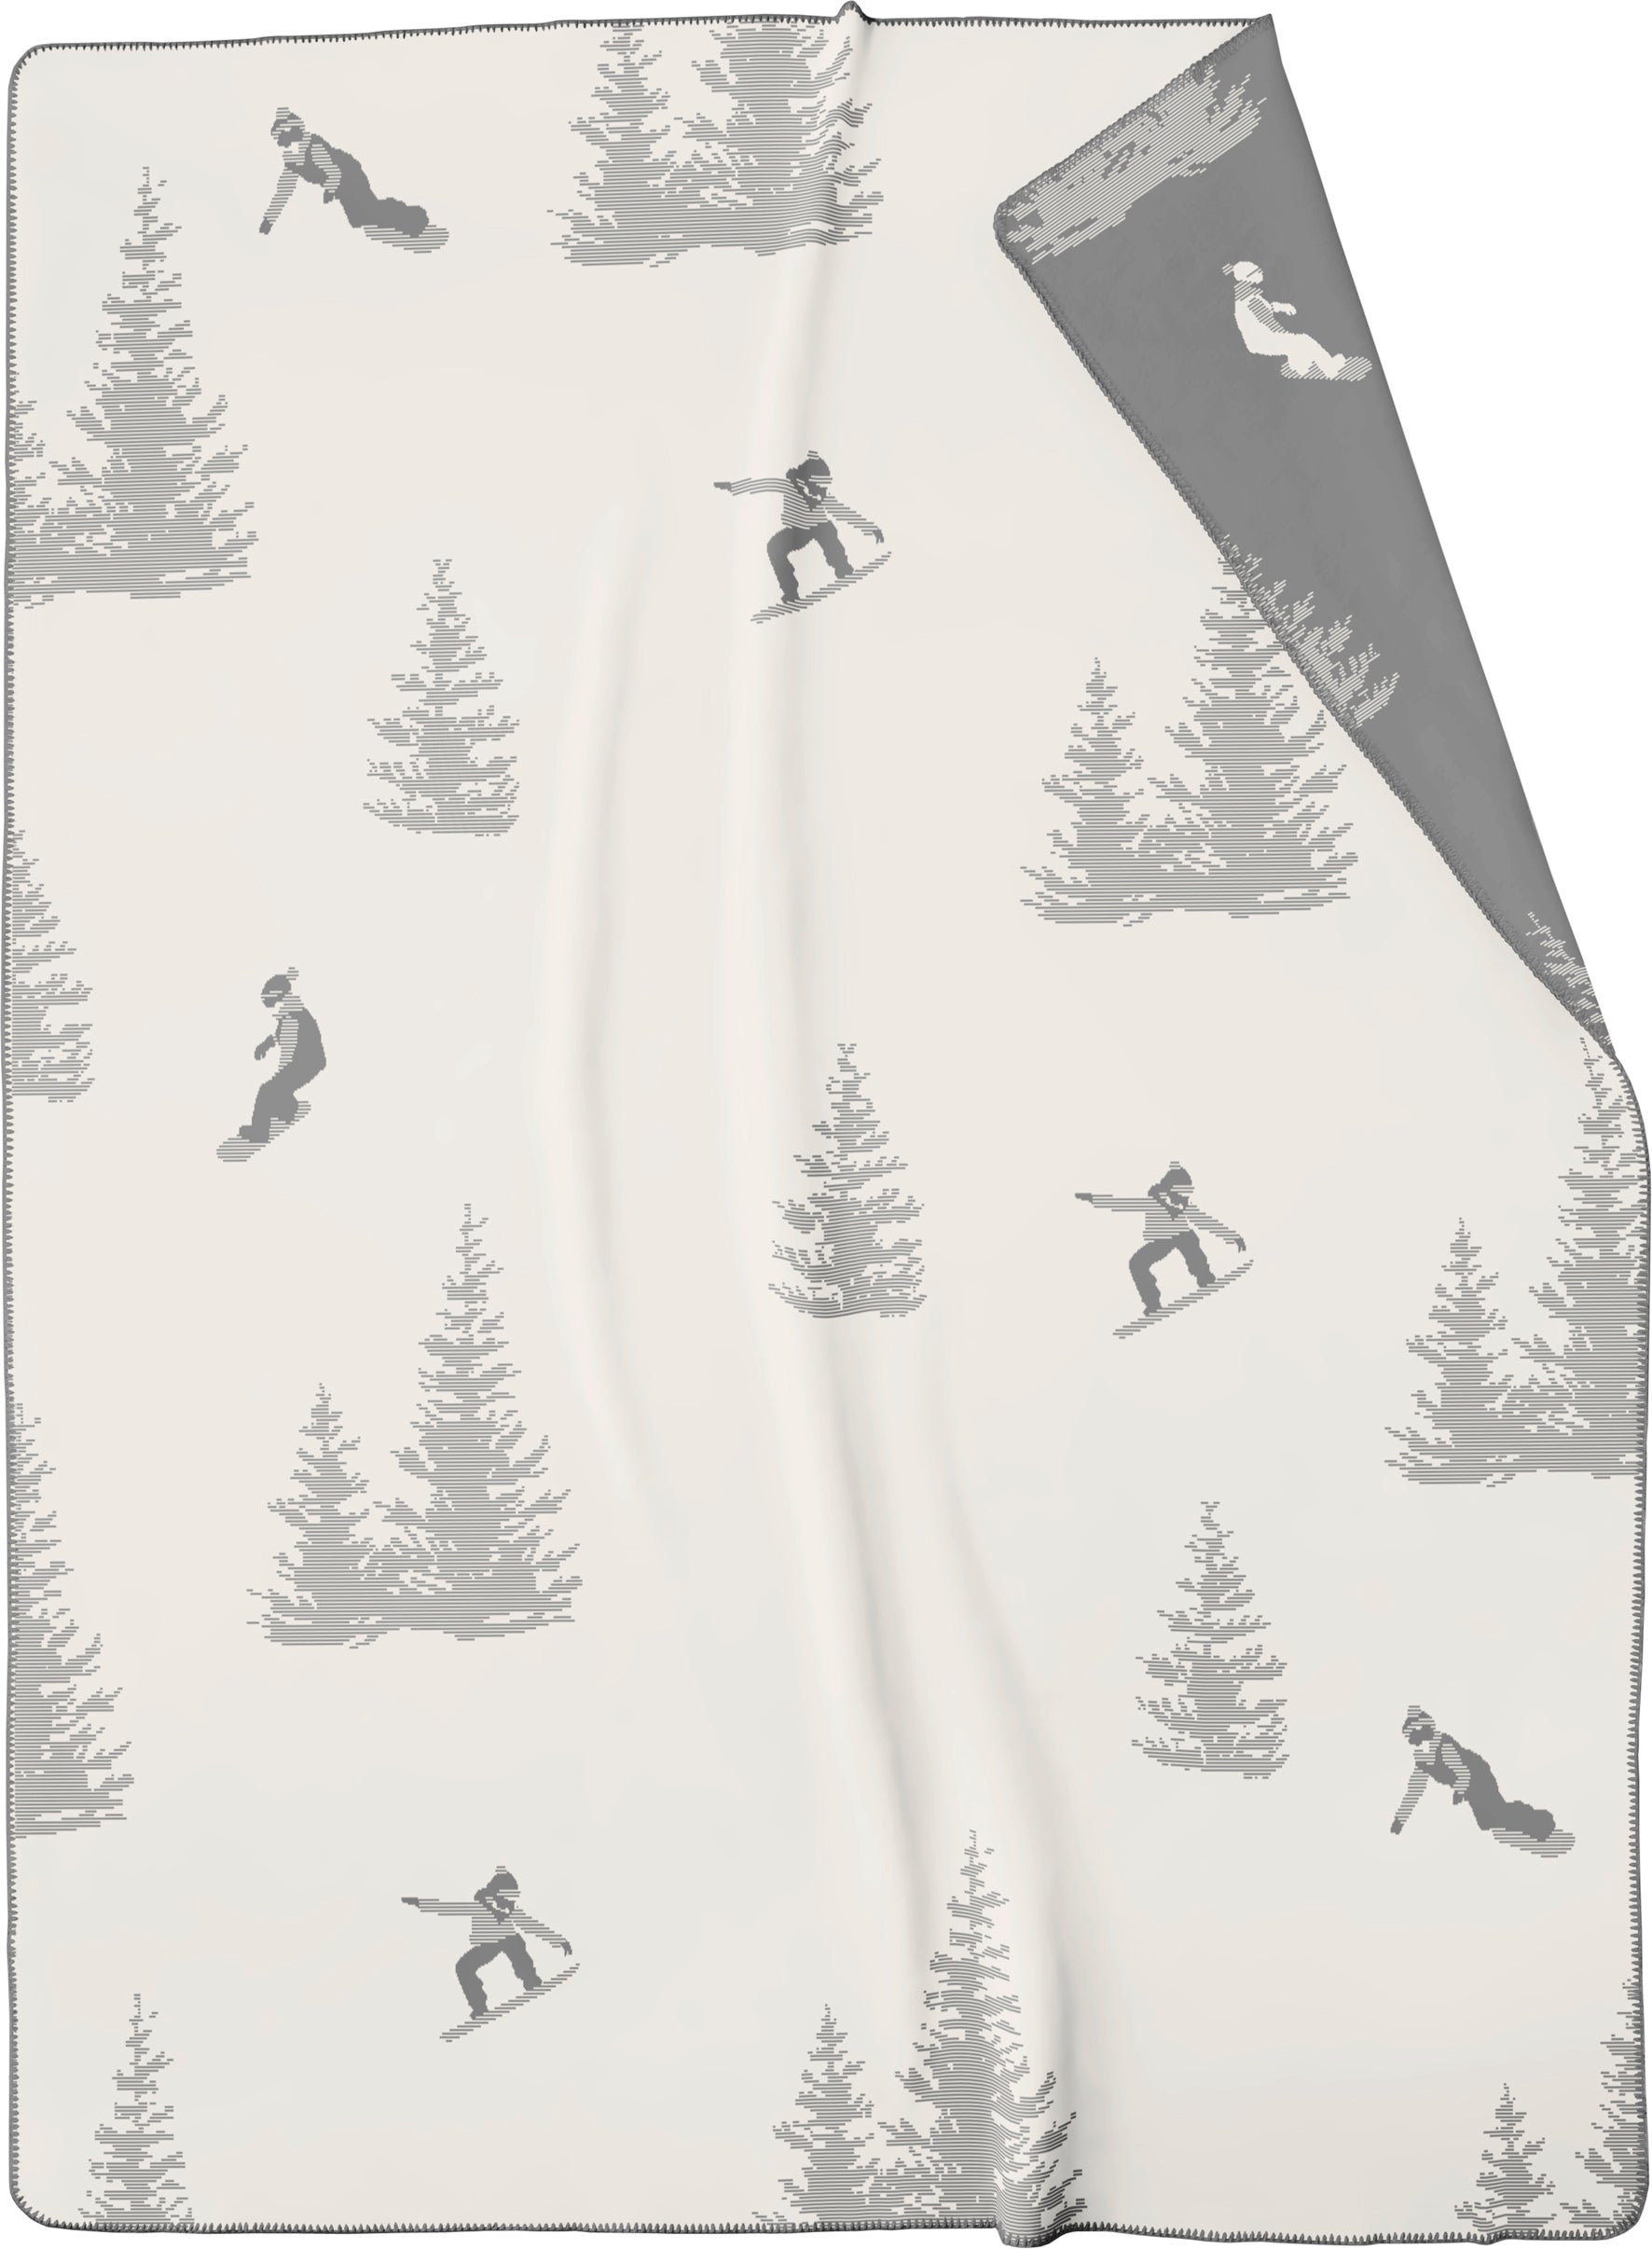 White blanket patterned with grey snowboarders and pine trees. Pattern alternates onto a grey background on the other side.